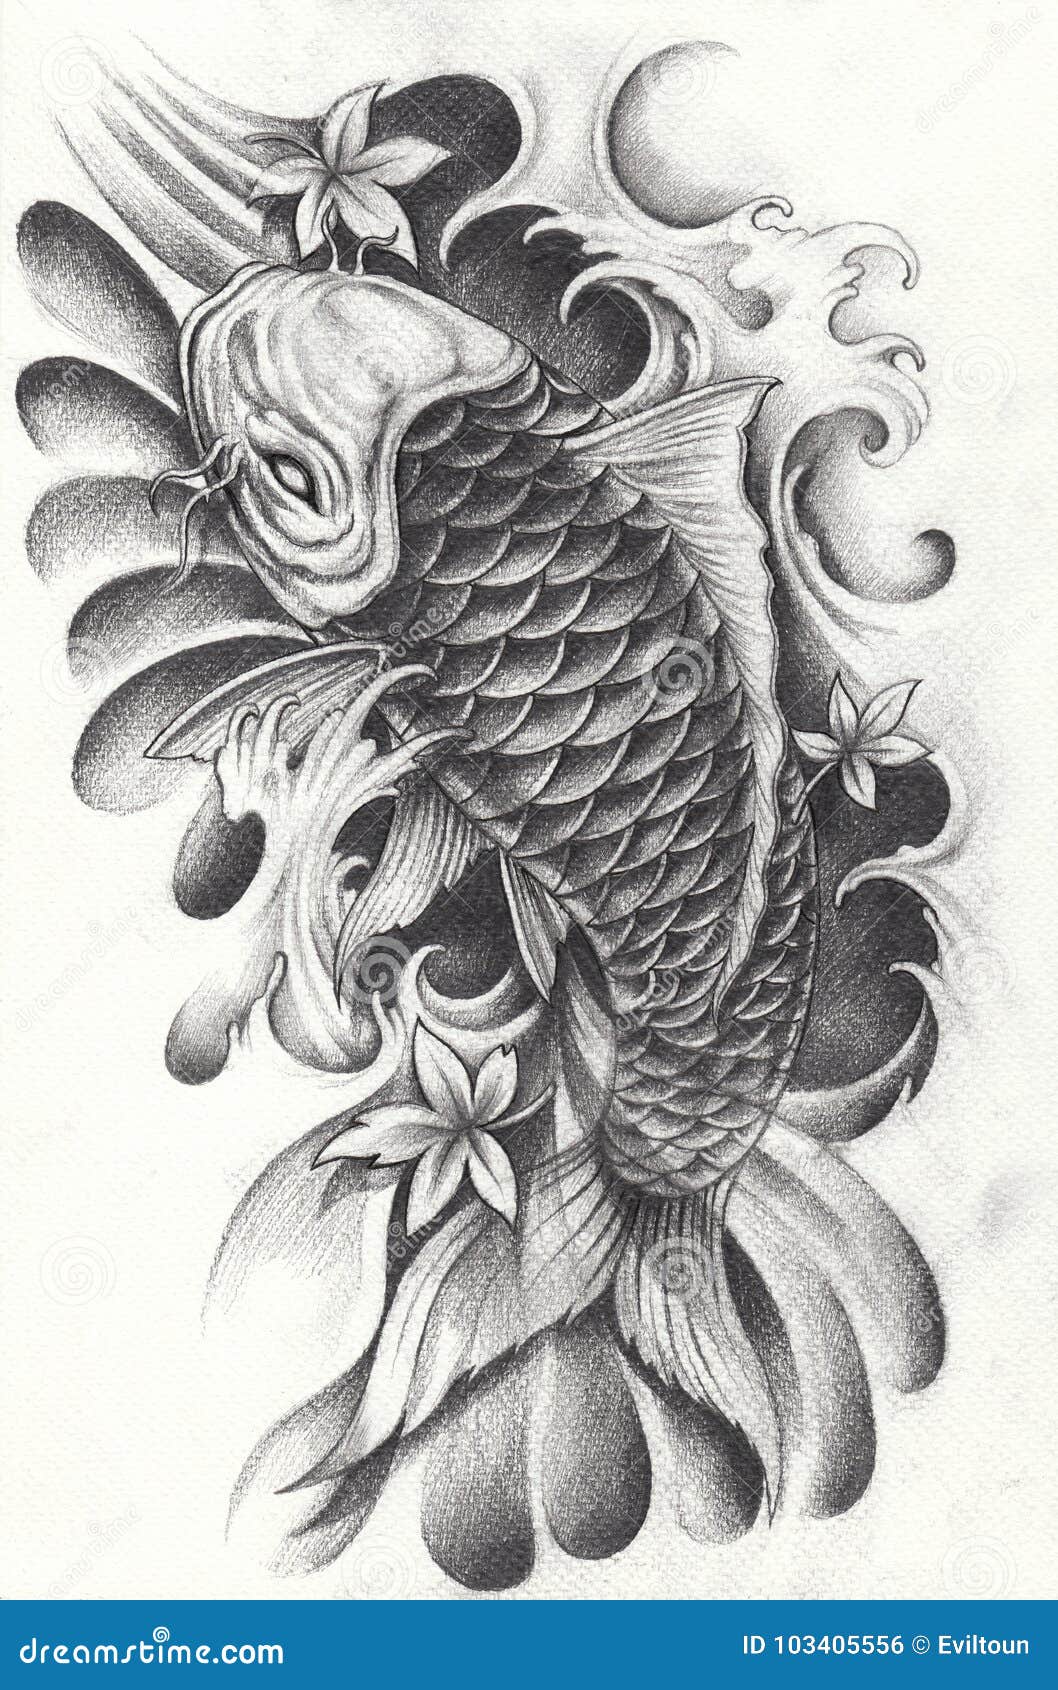 Trippy fish and hand tattoo on the left thigh